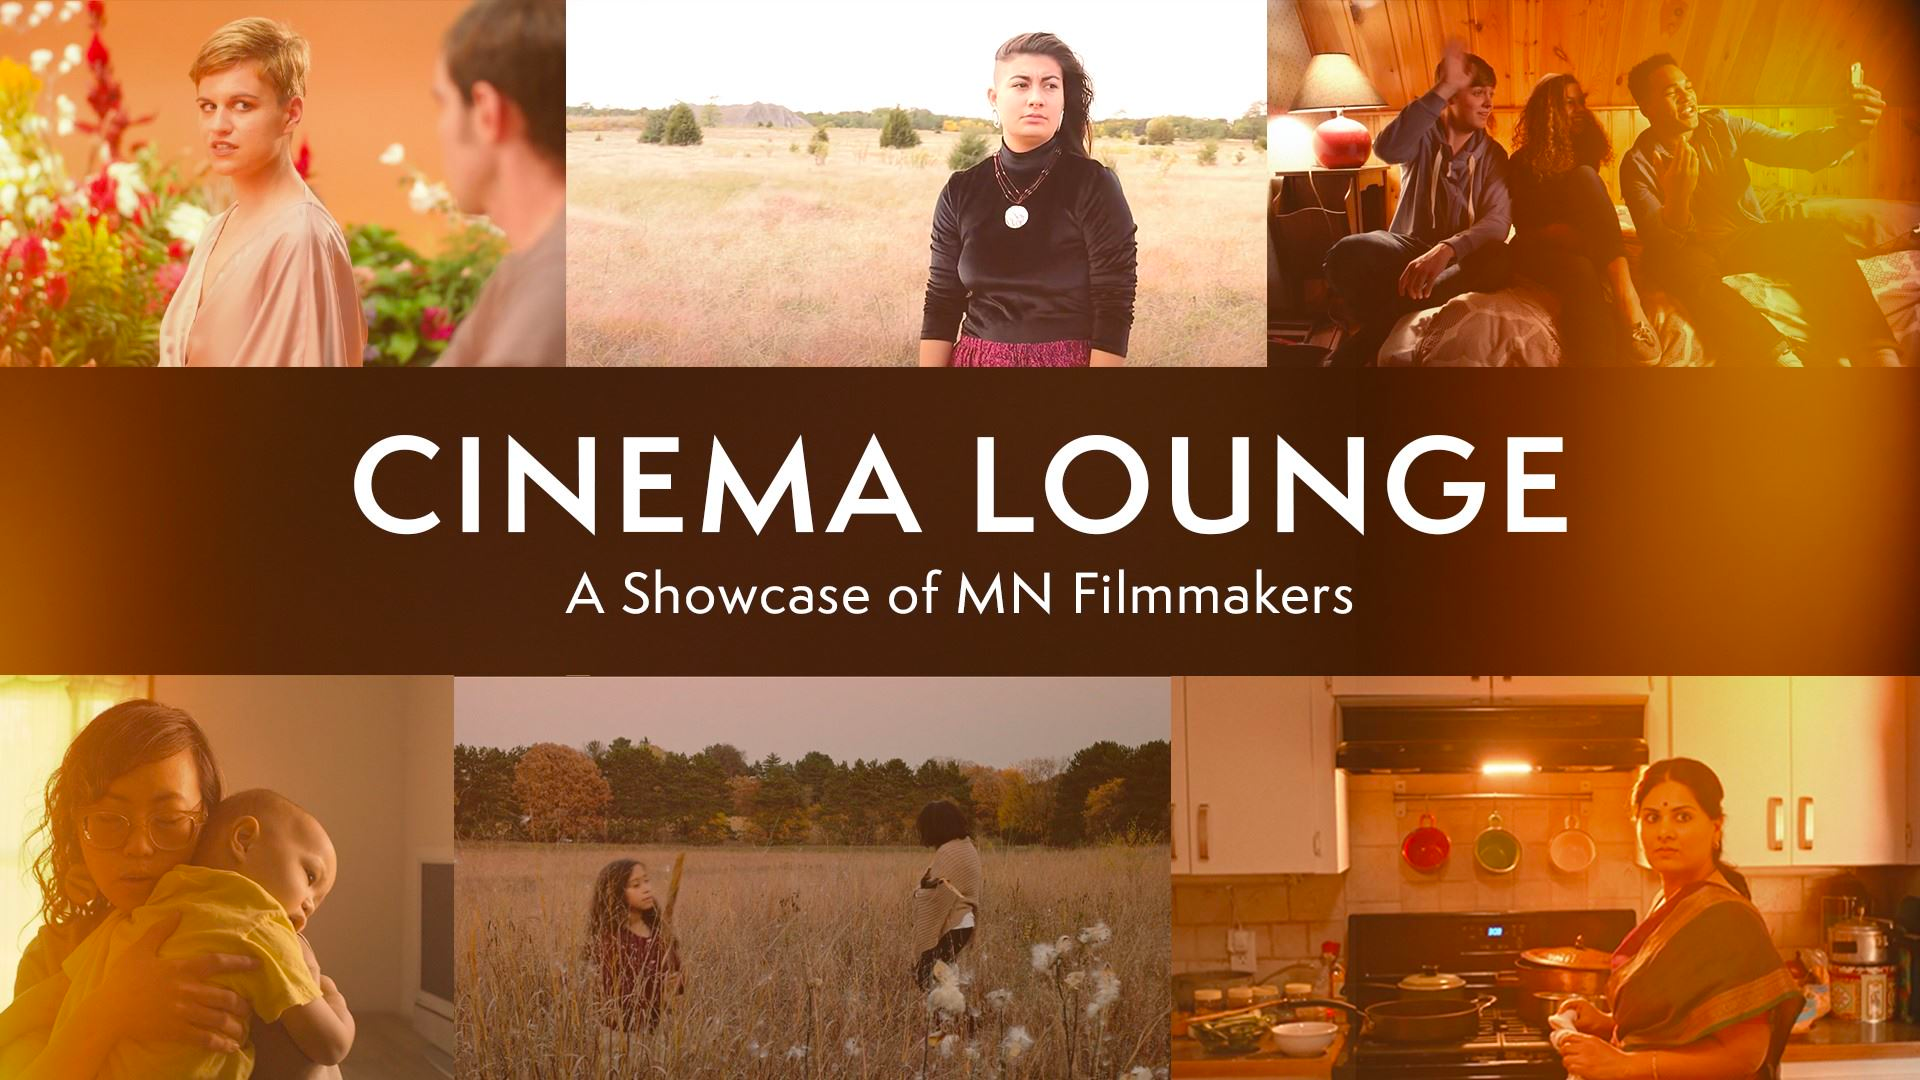 Cinema Lounge: A Showcase of MN Filmmakers